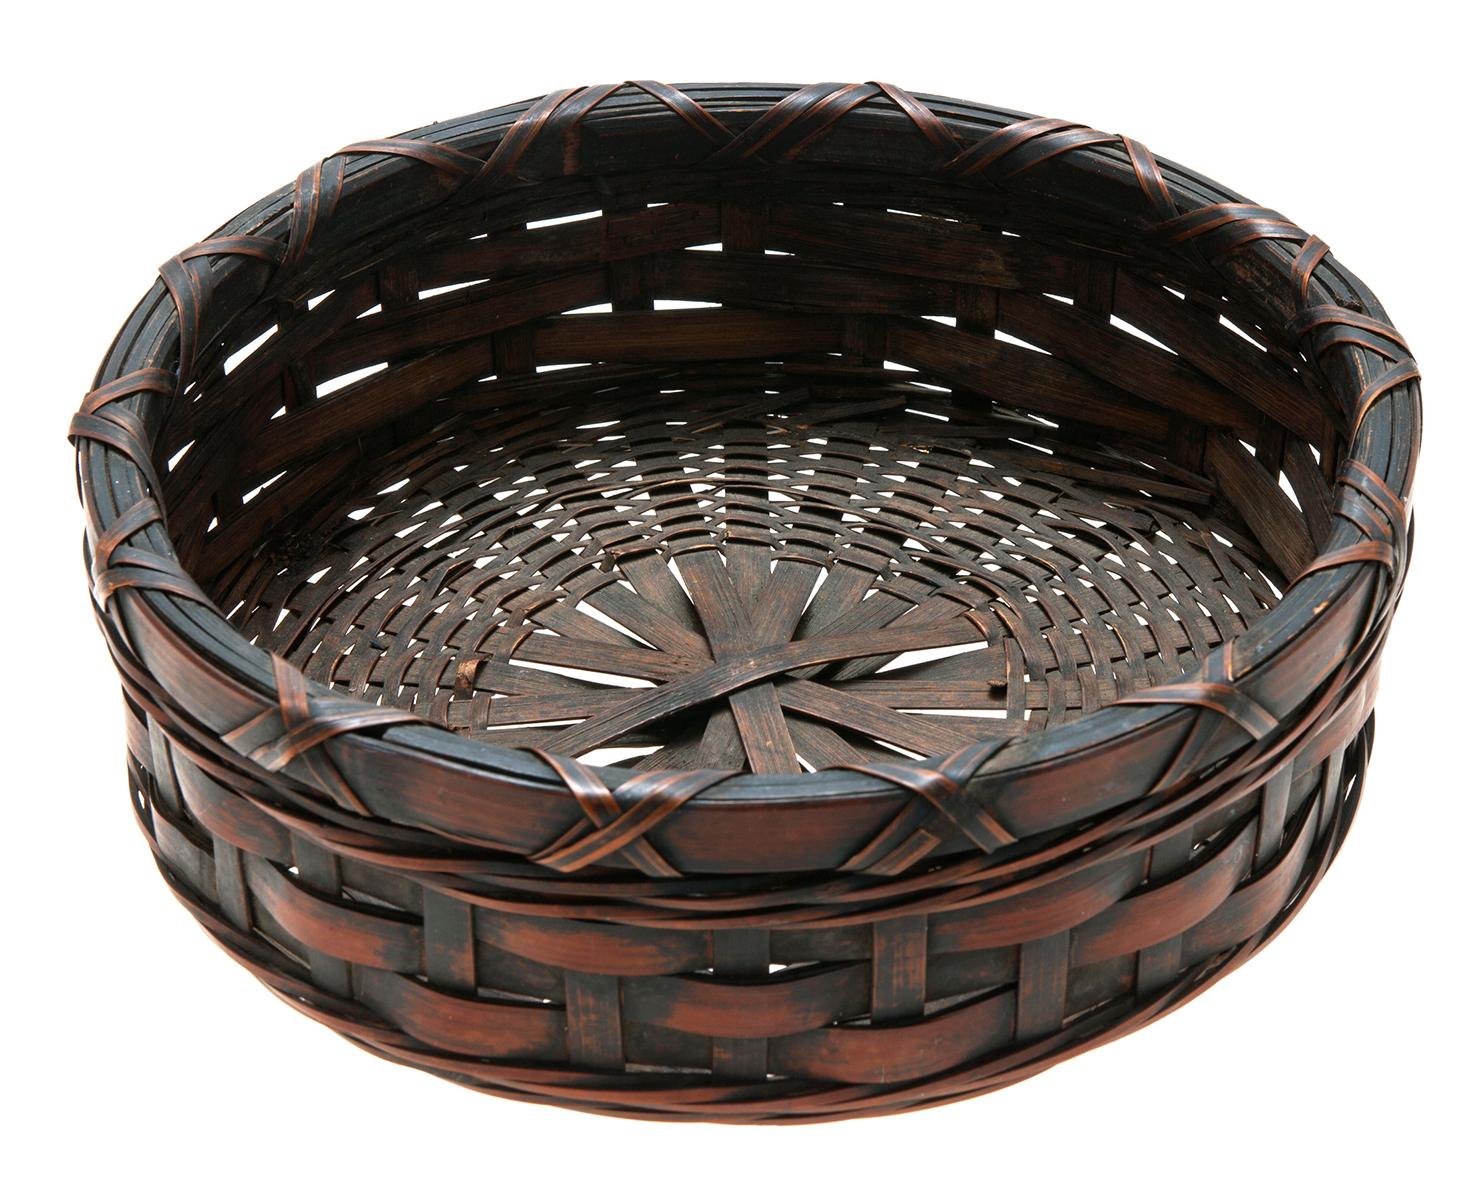 Early 20th century vintage Japanese handwoven round bamboo basket for fruits & such.
The Japanese bamboo weaving is in reddish dark brown.
In pristine condition.
